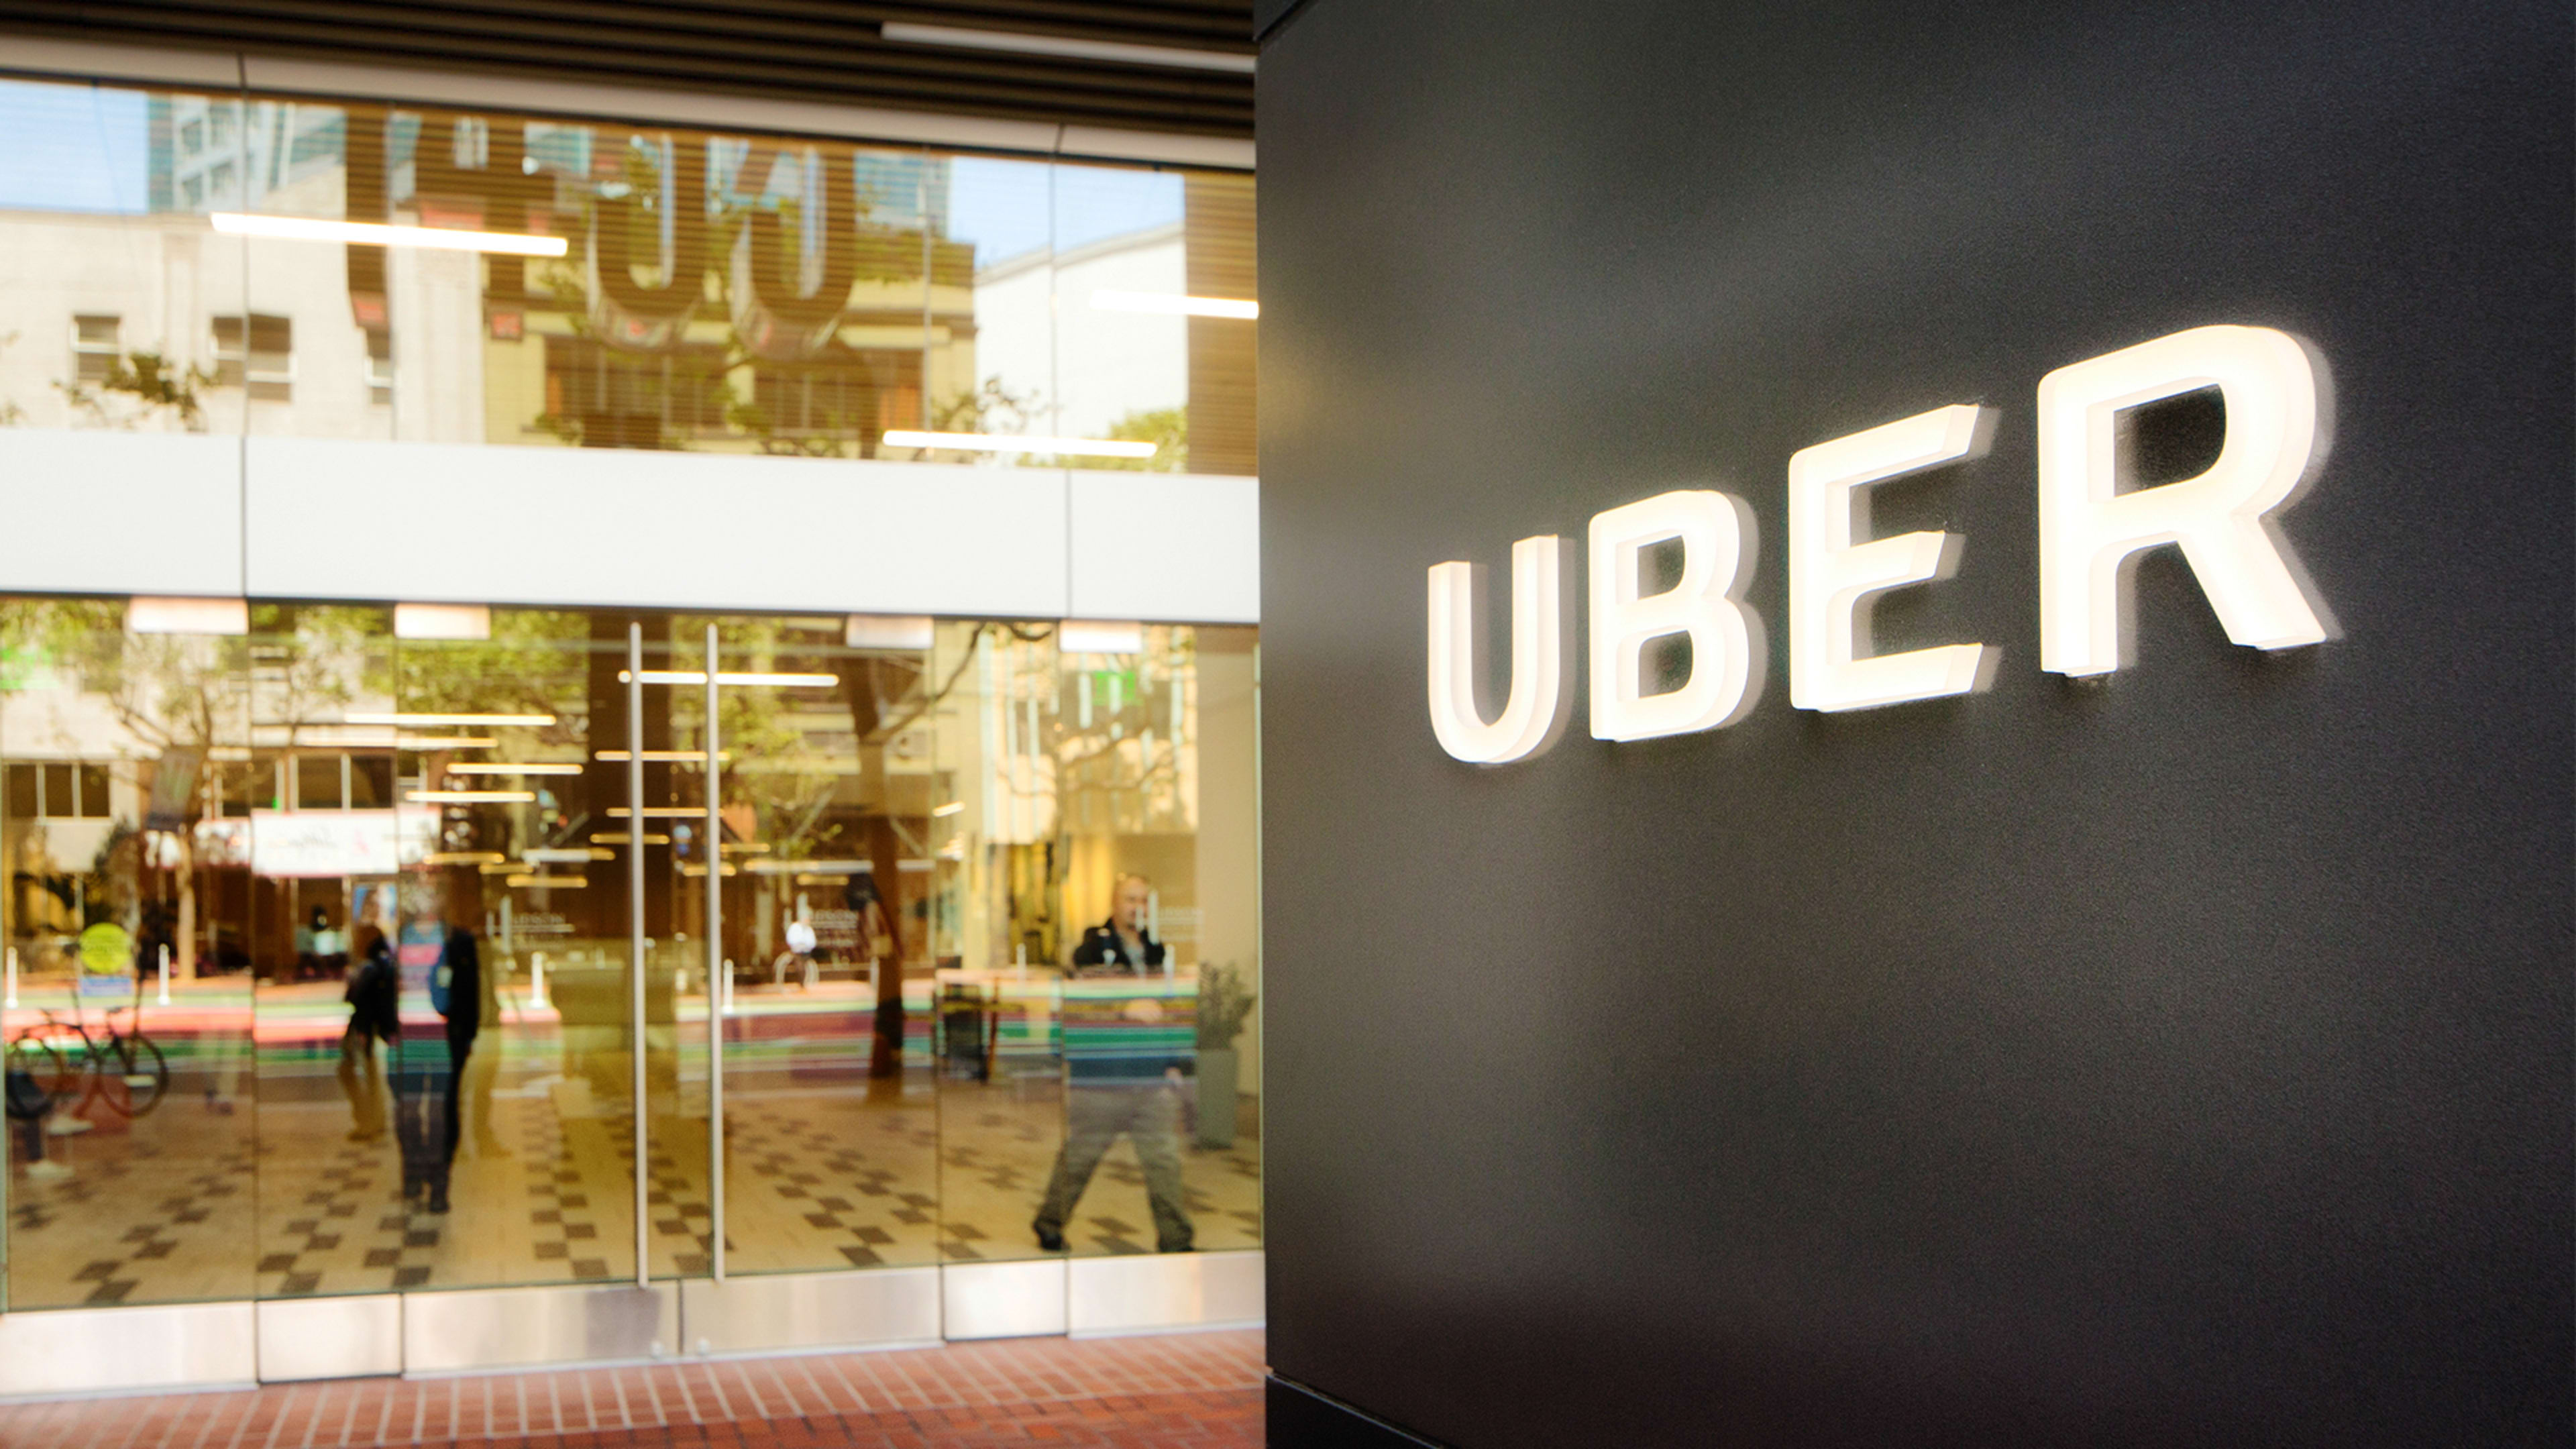 Here’s What Uber Needs To Do To Fix Their Broken Culture